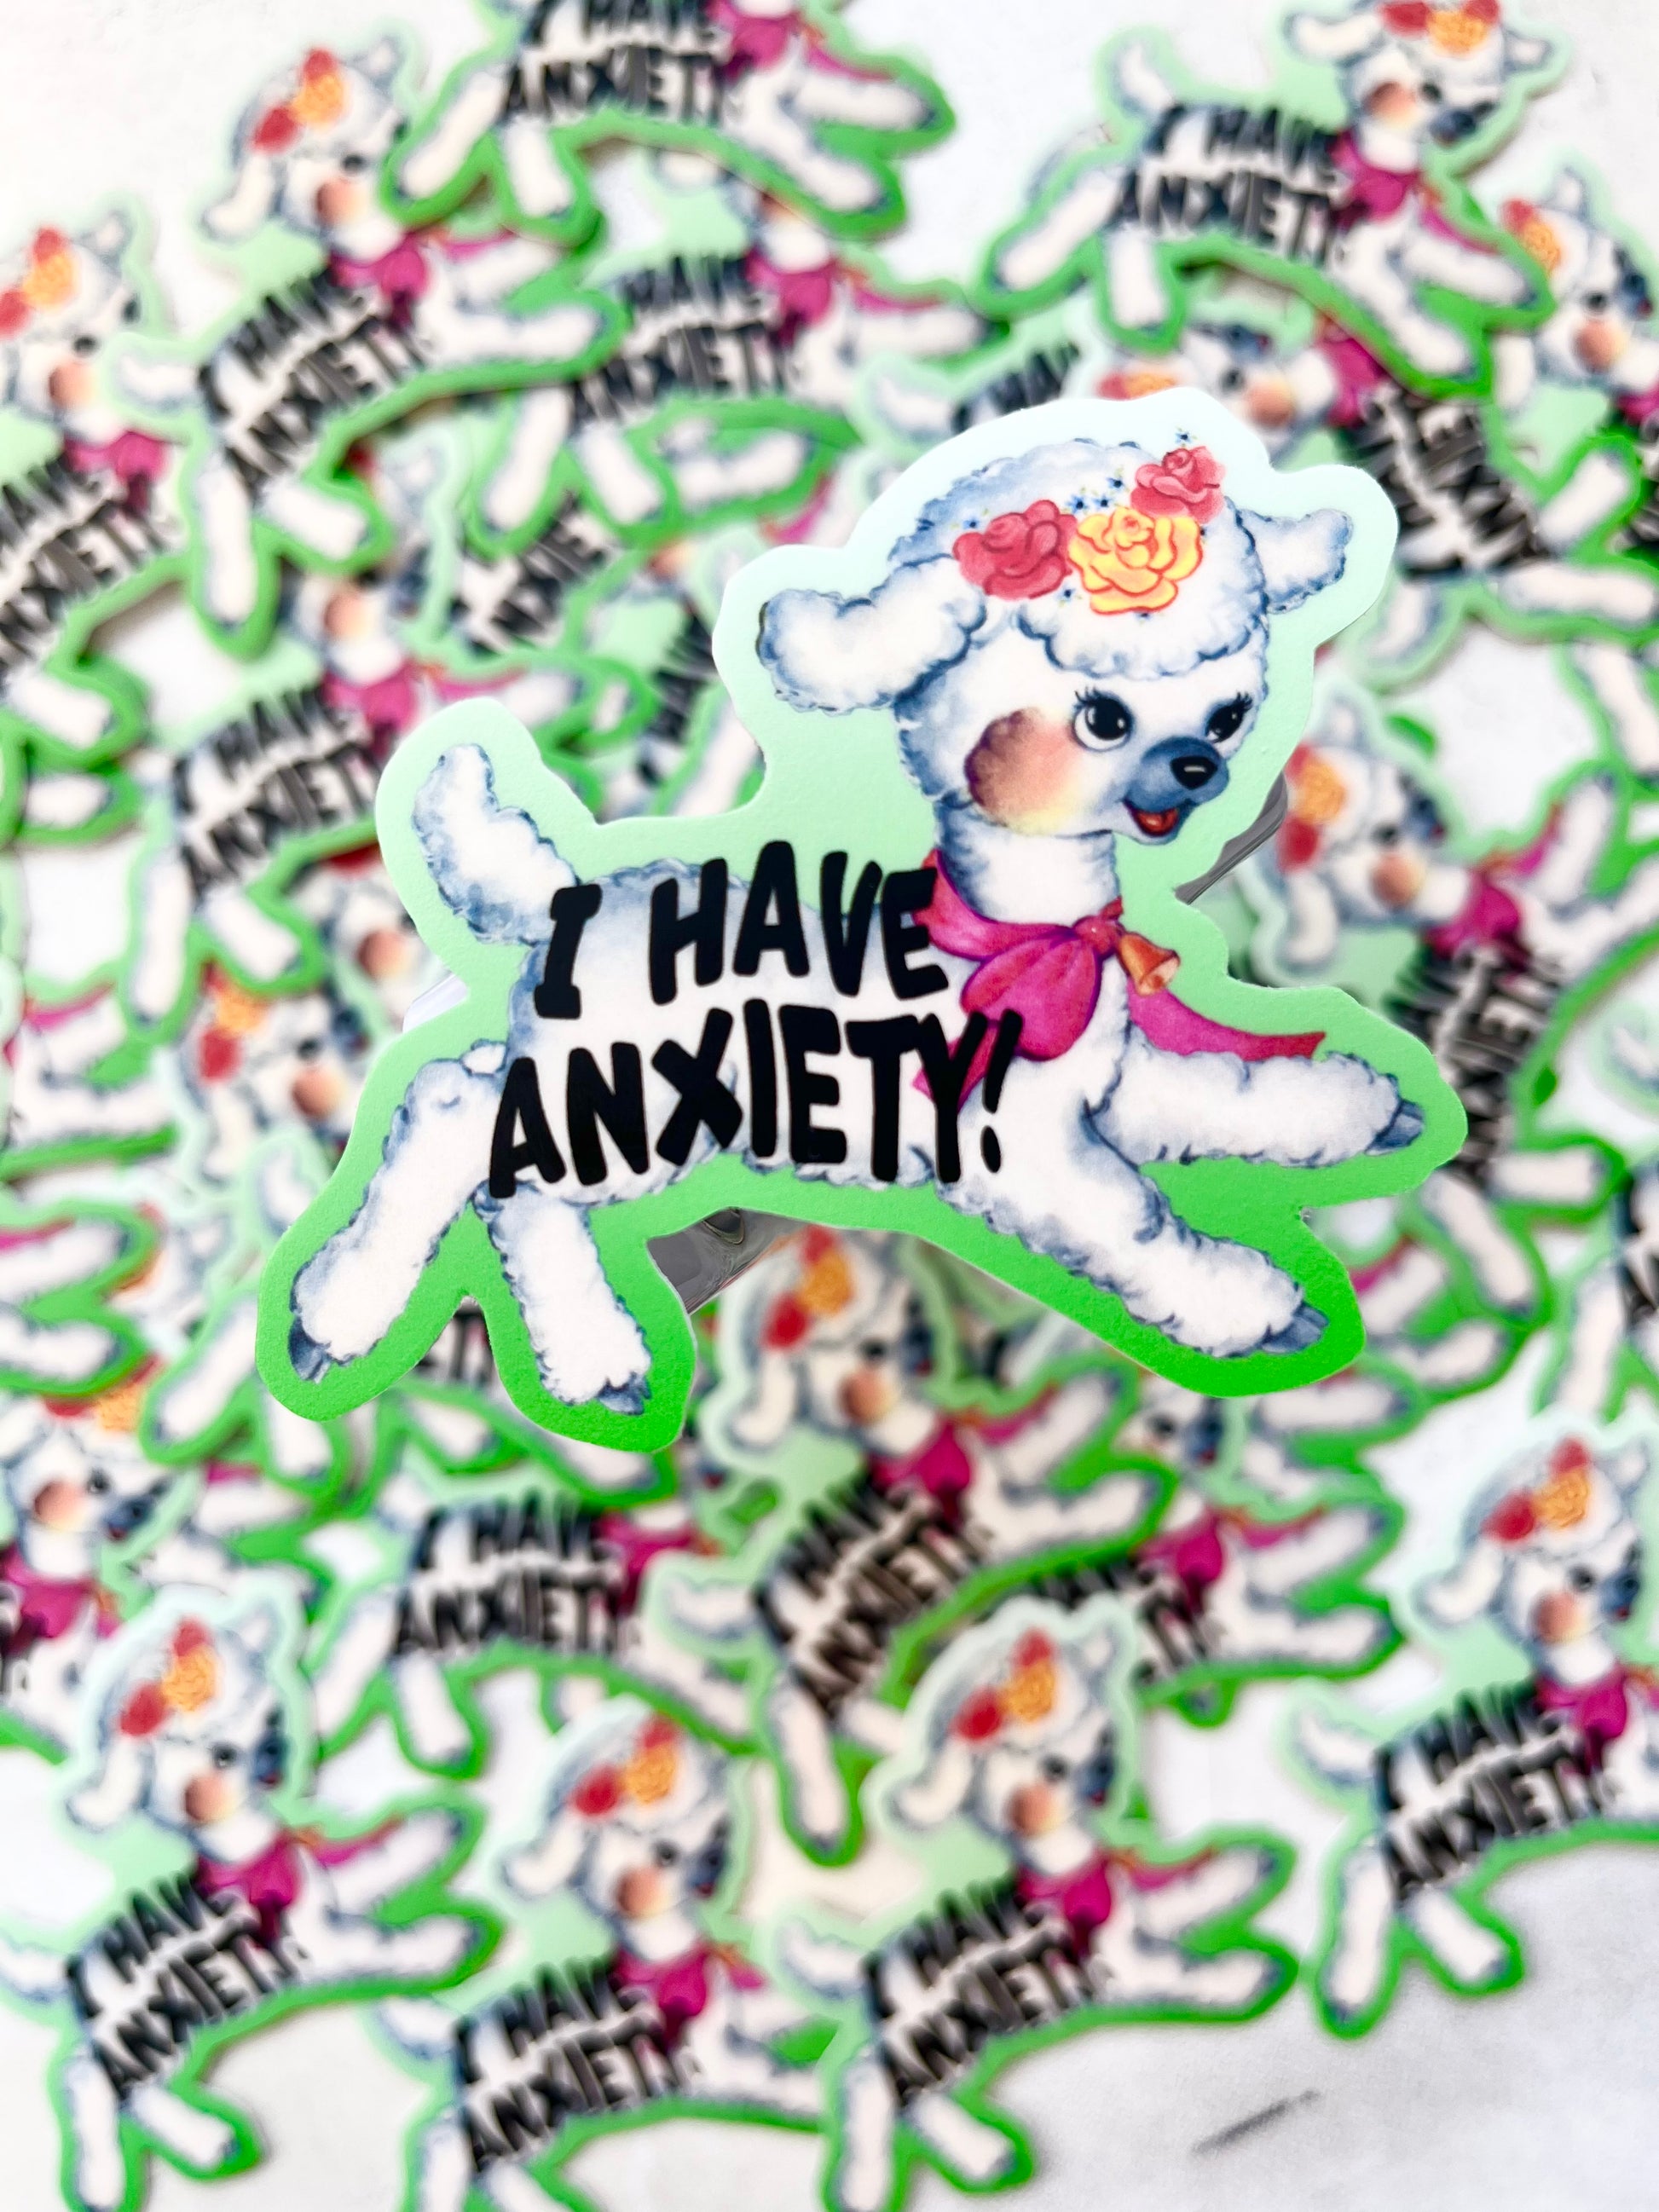 coin laundry cute anxiety sheep sticker funny animal sticker i have anxiety green i have anxiety sticker with flowers coin laundry montana 